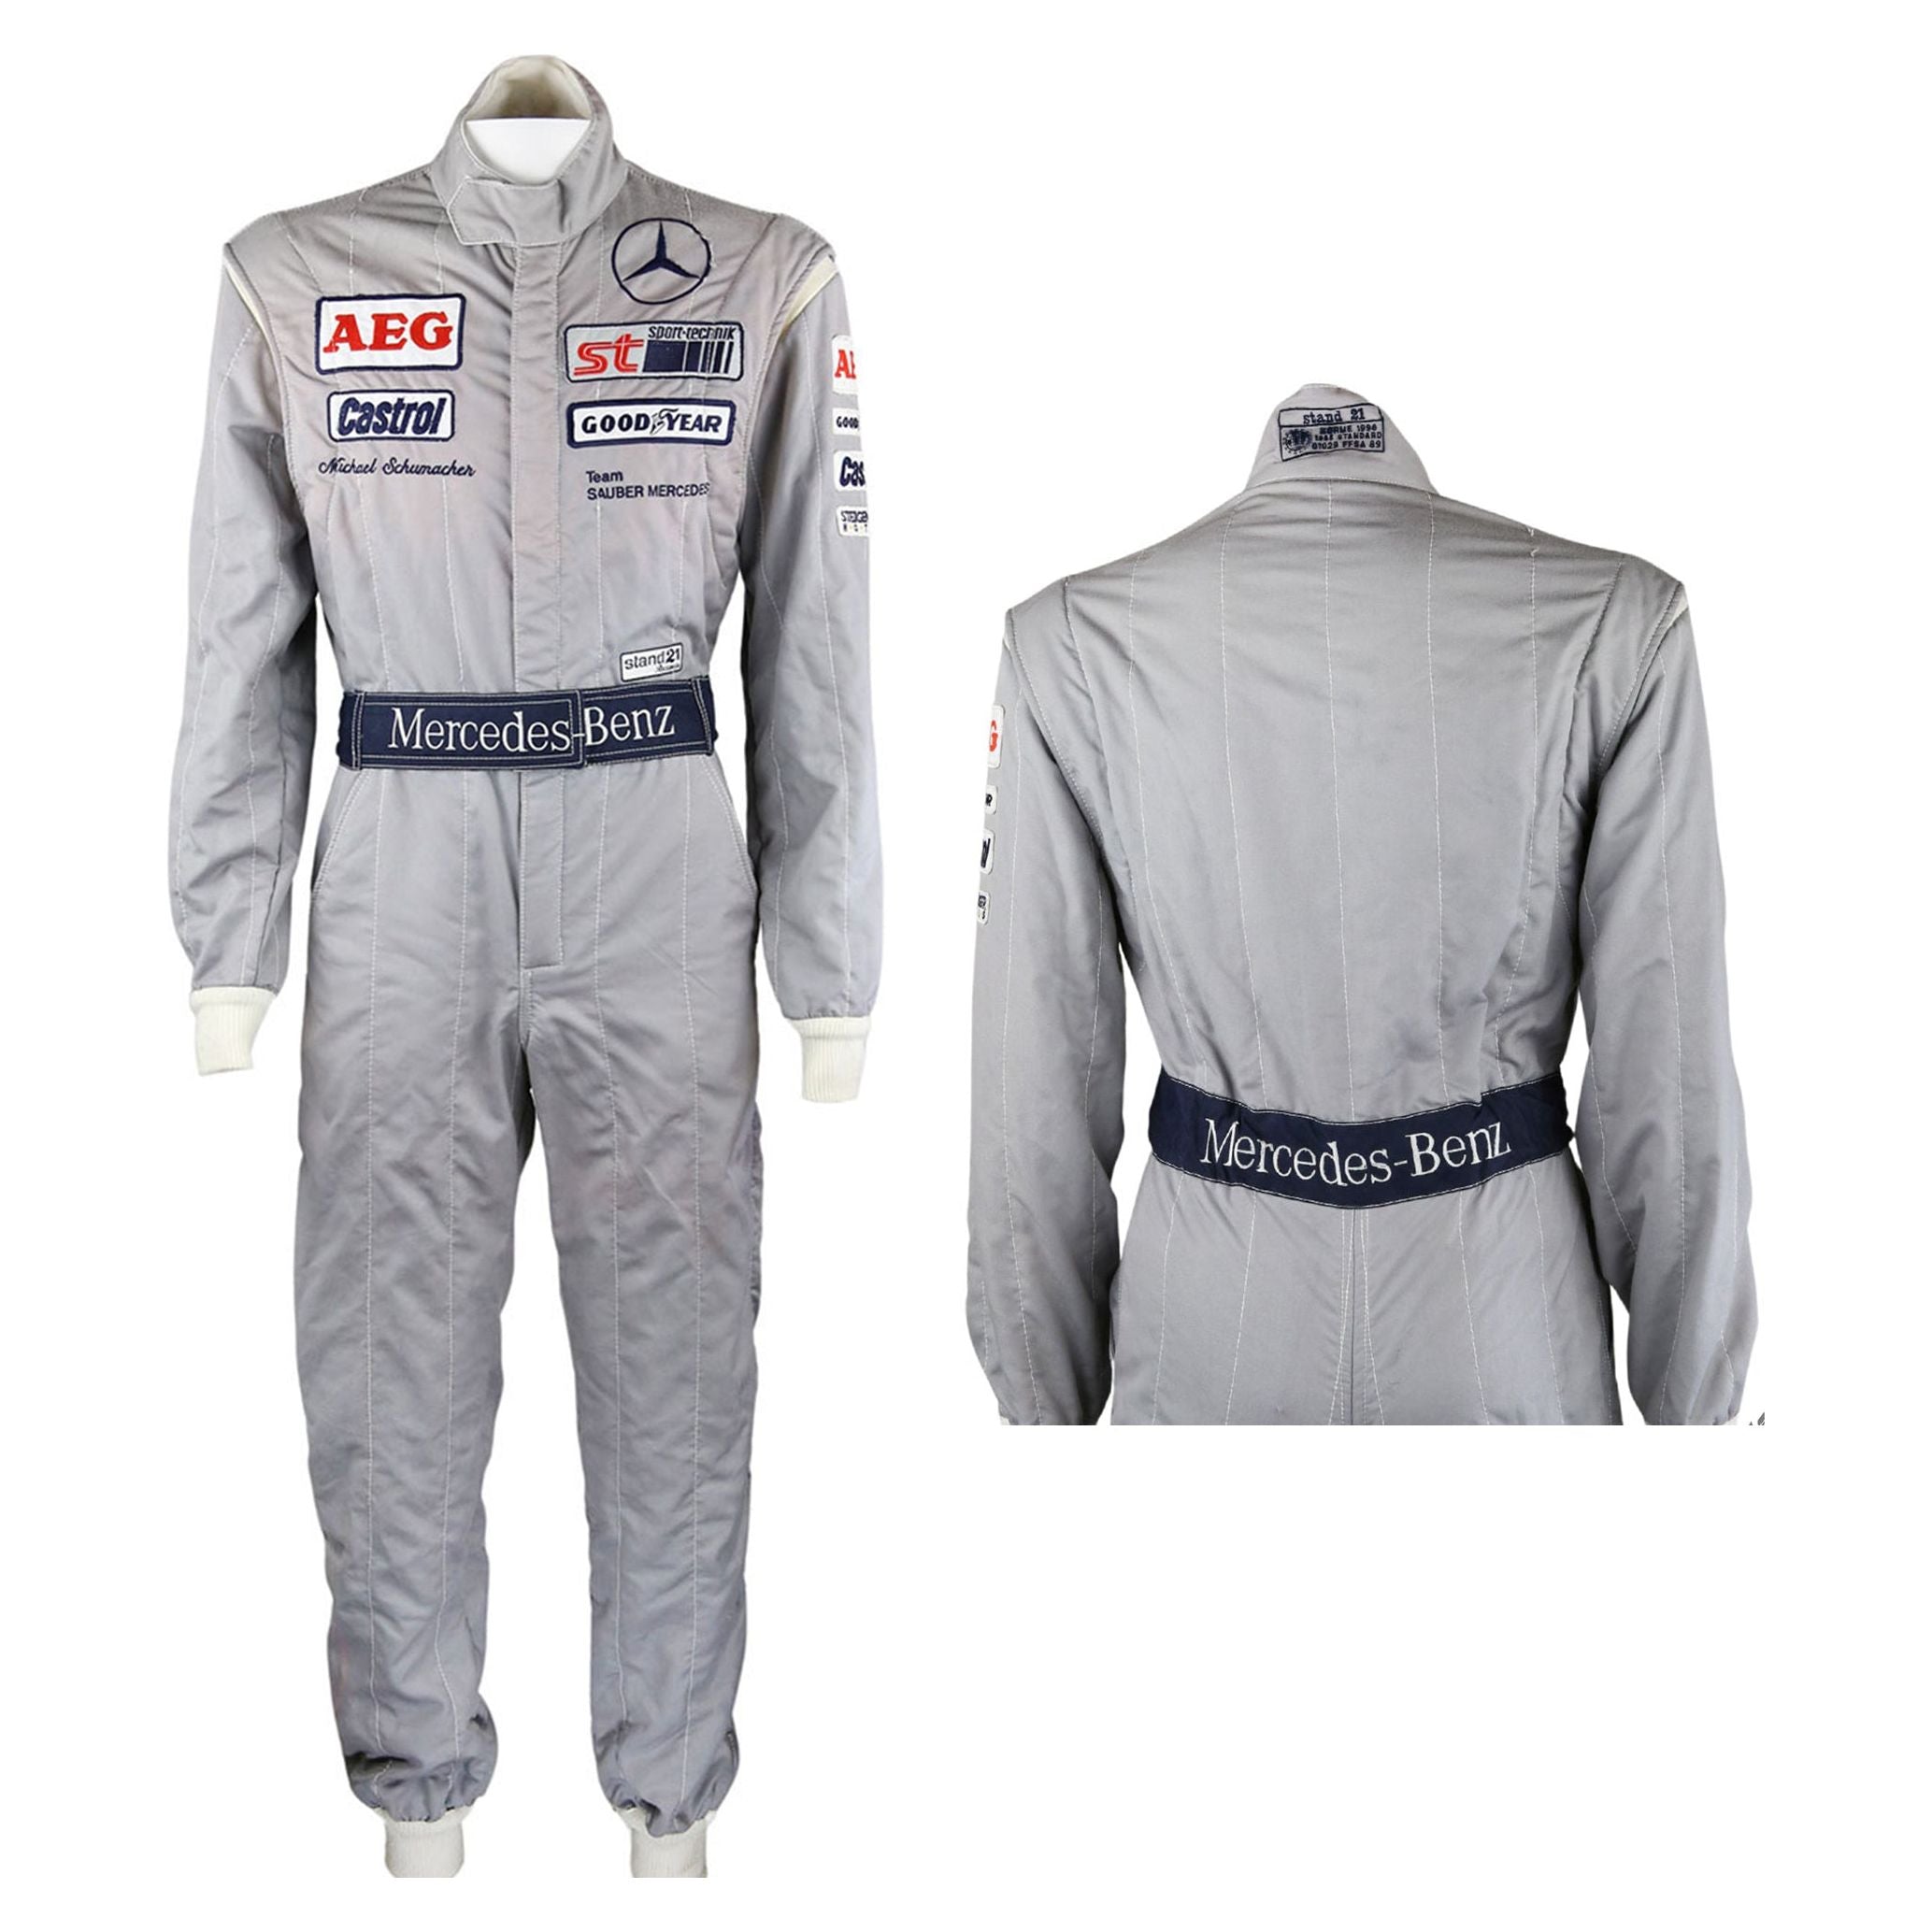 kart racing Sublimation Protective clothing Racing gear Suit N-0243